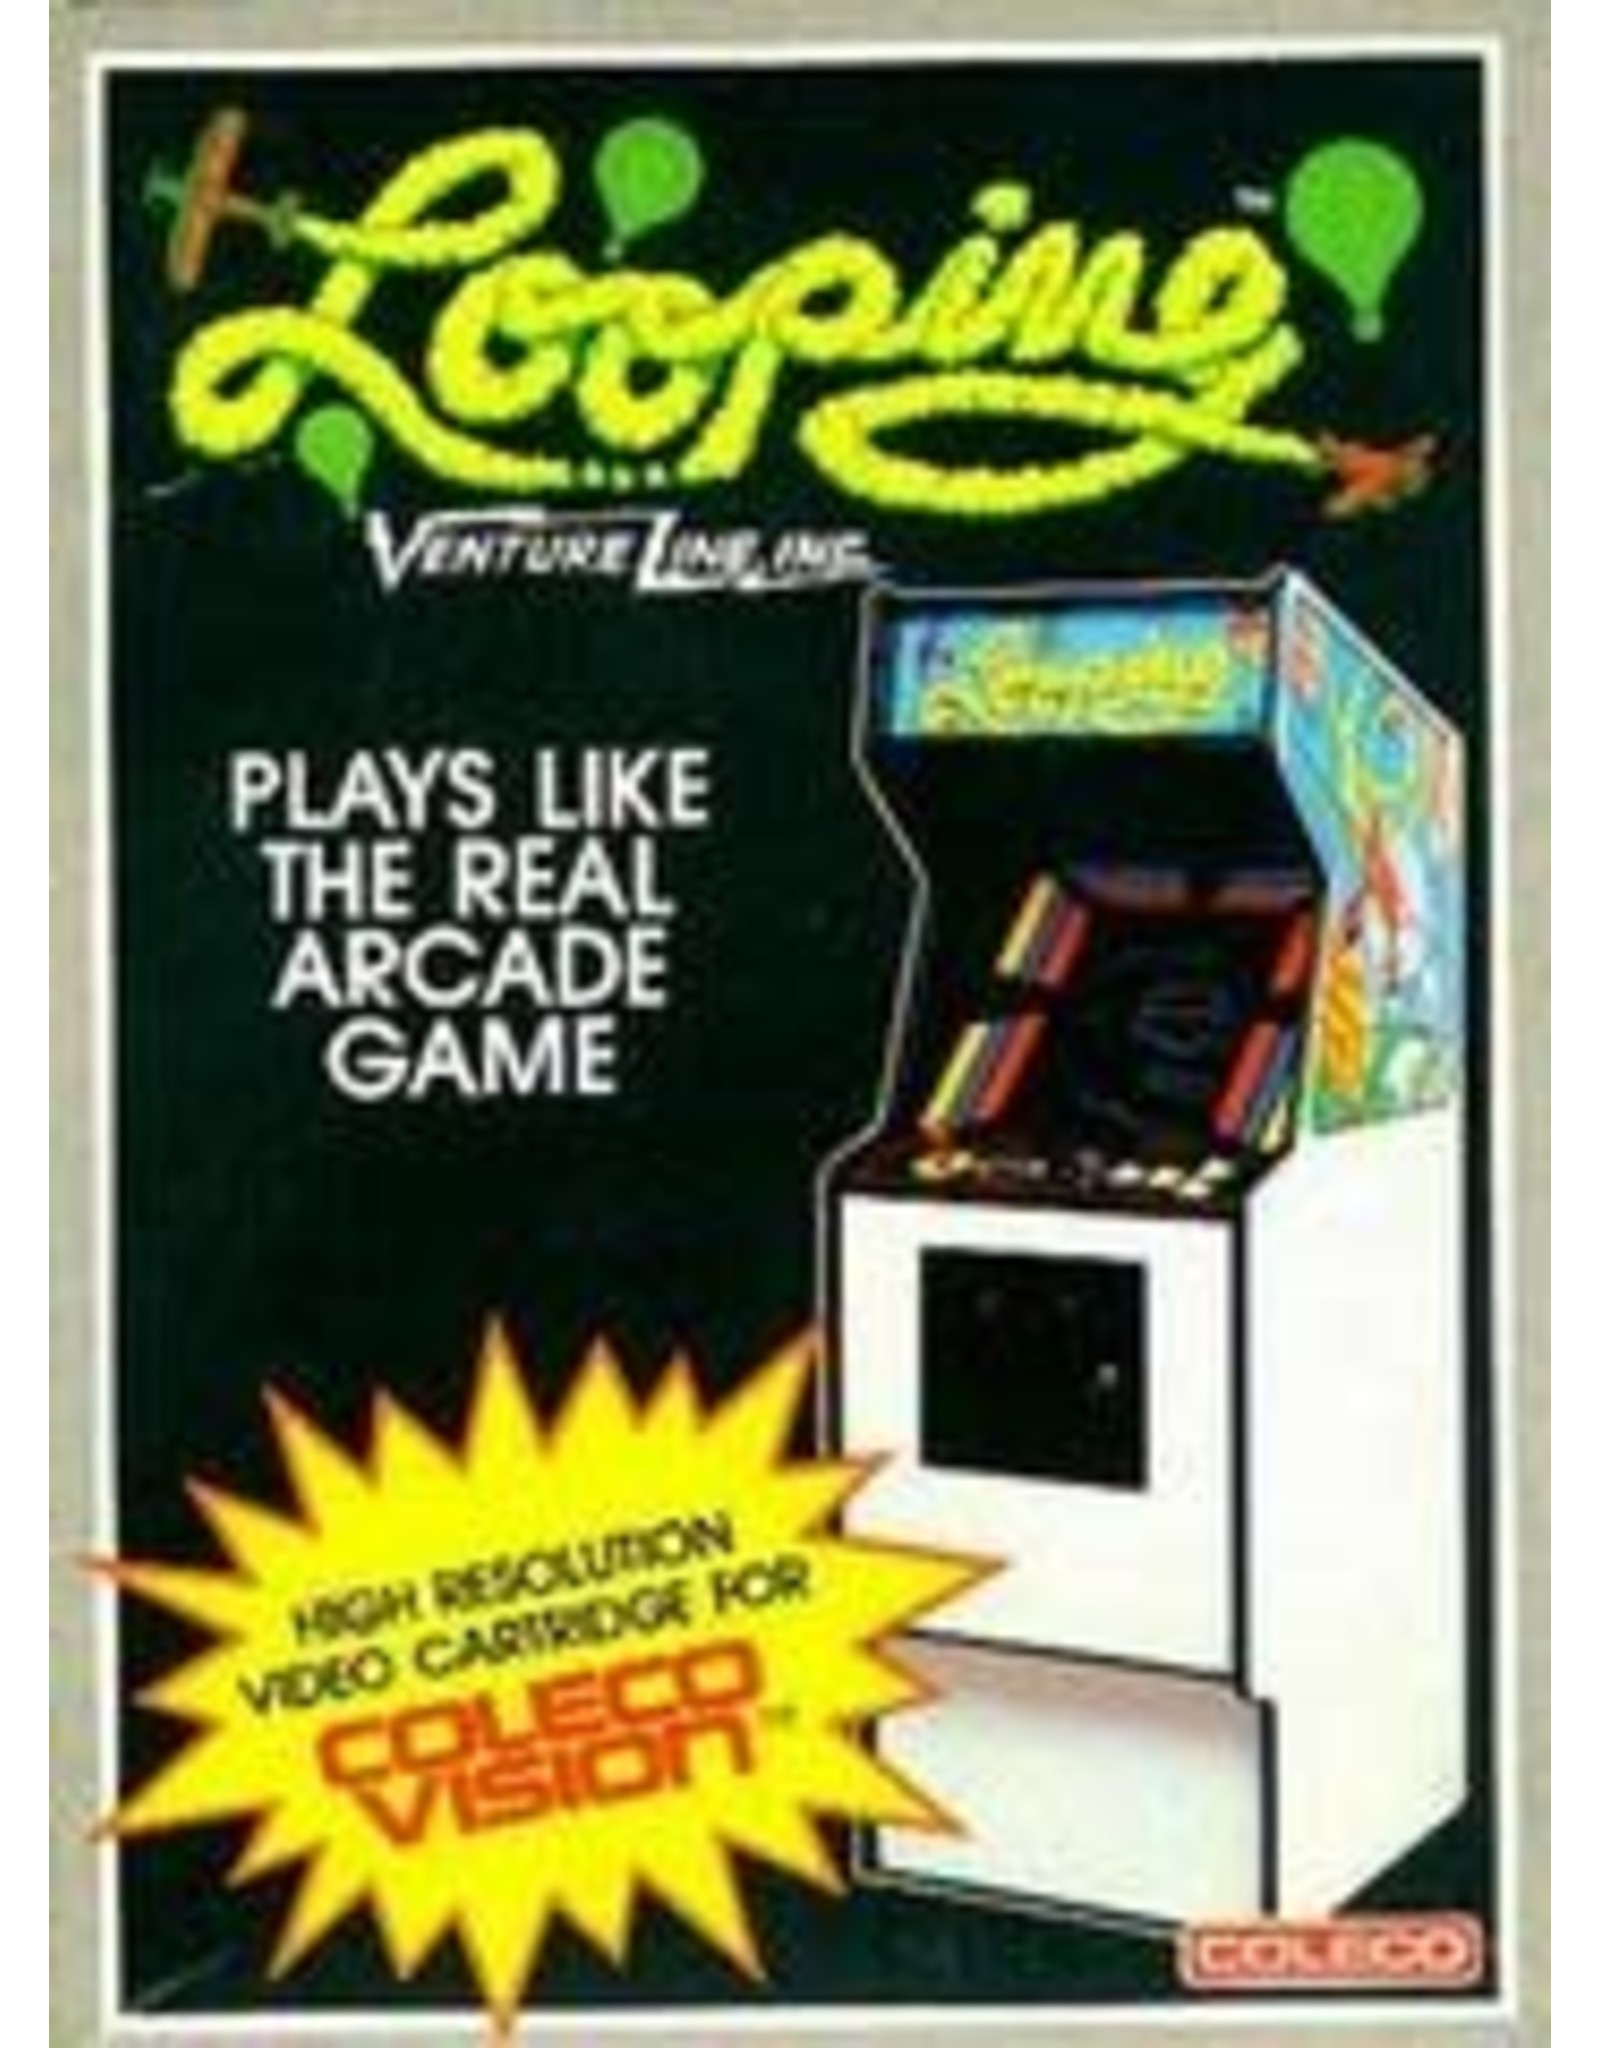 Colecovision Looping (Cart Only)